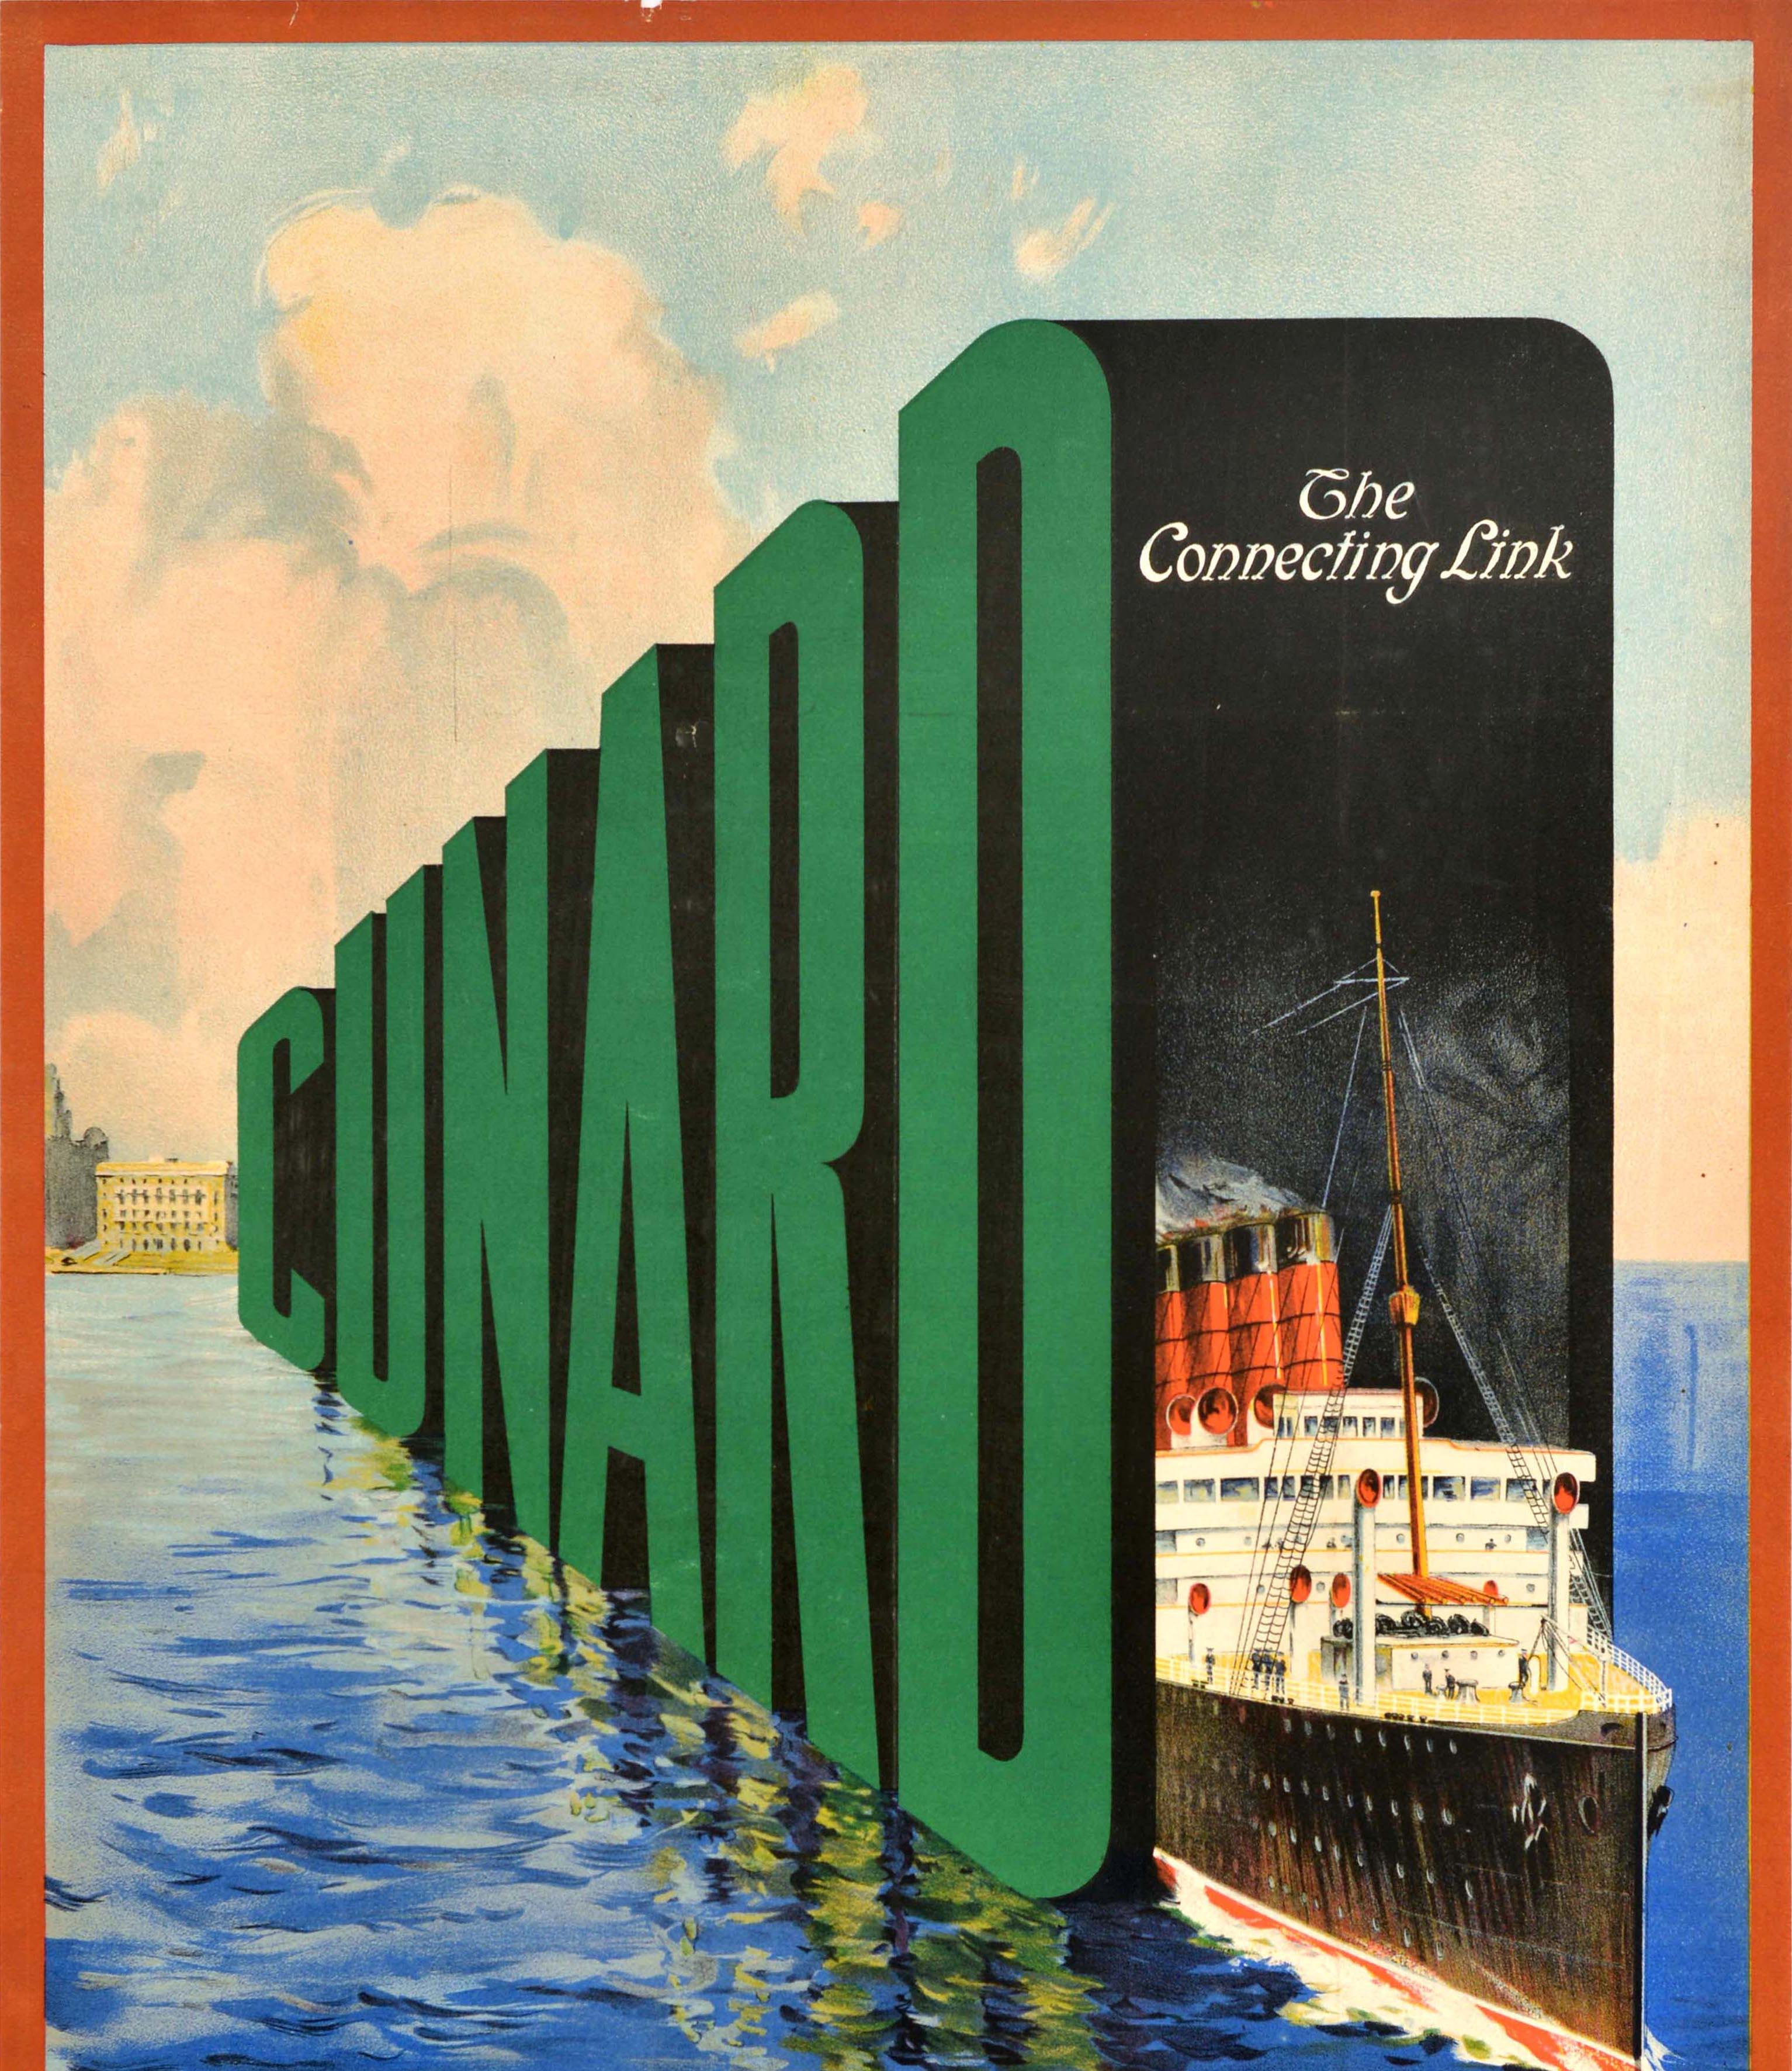 British Original Vintage Cruise Travel Poster Cunard The Connecting Link Europe America For Sale